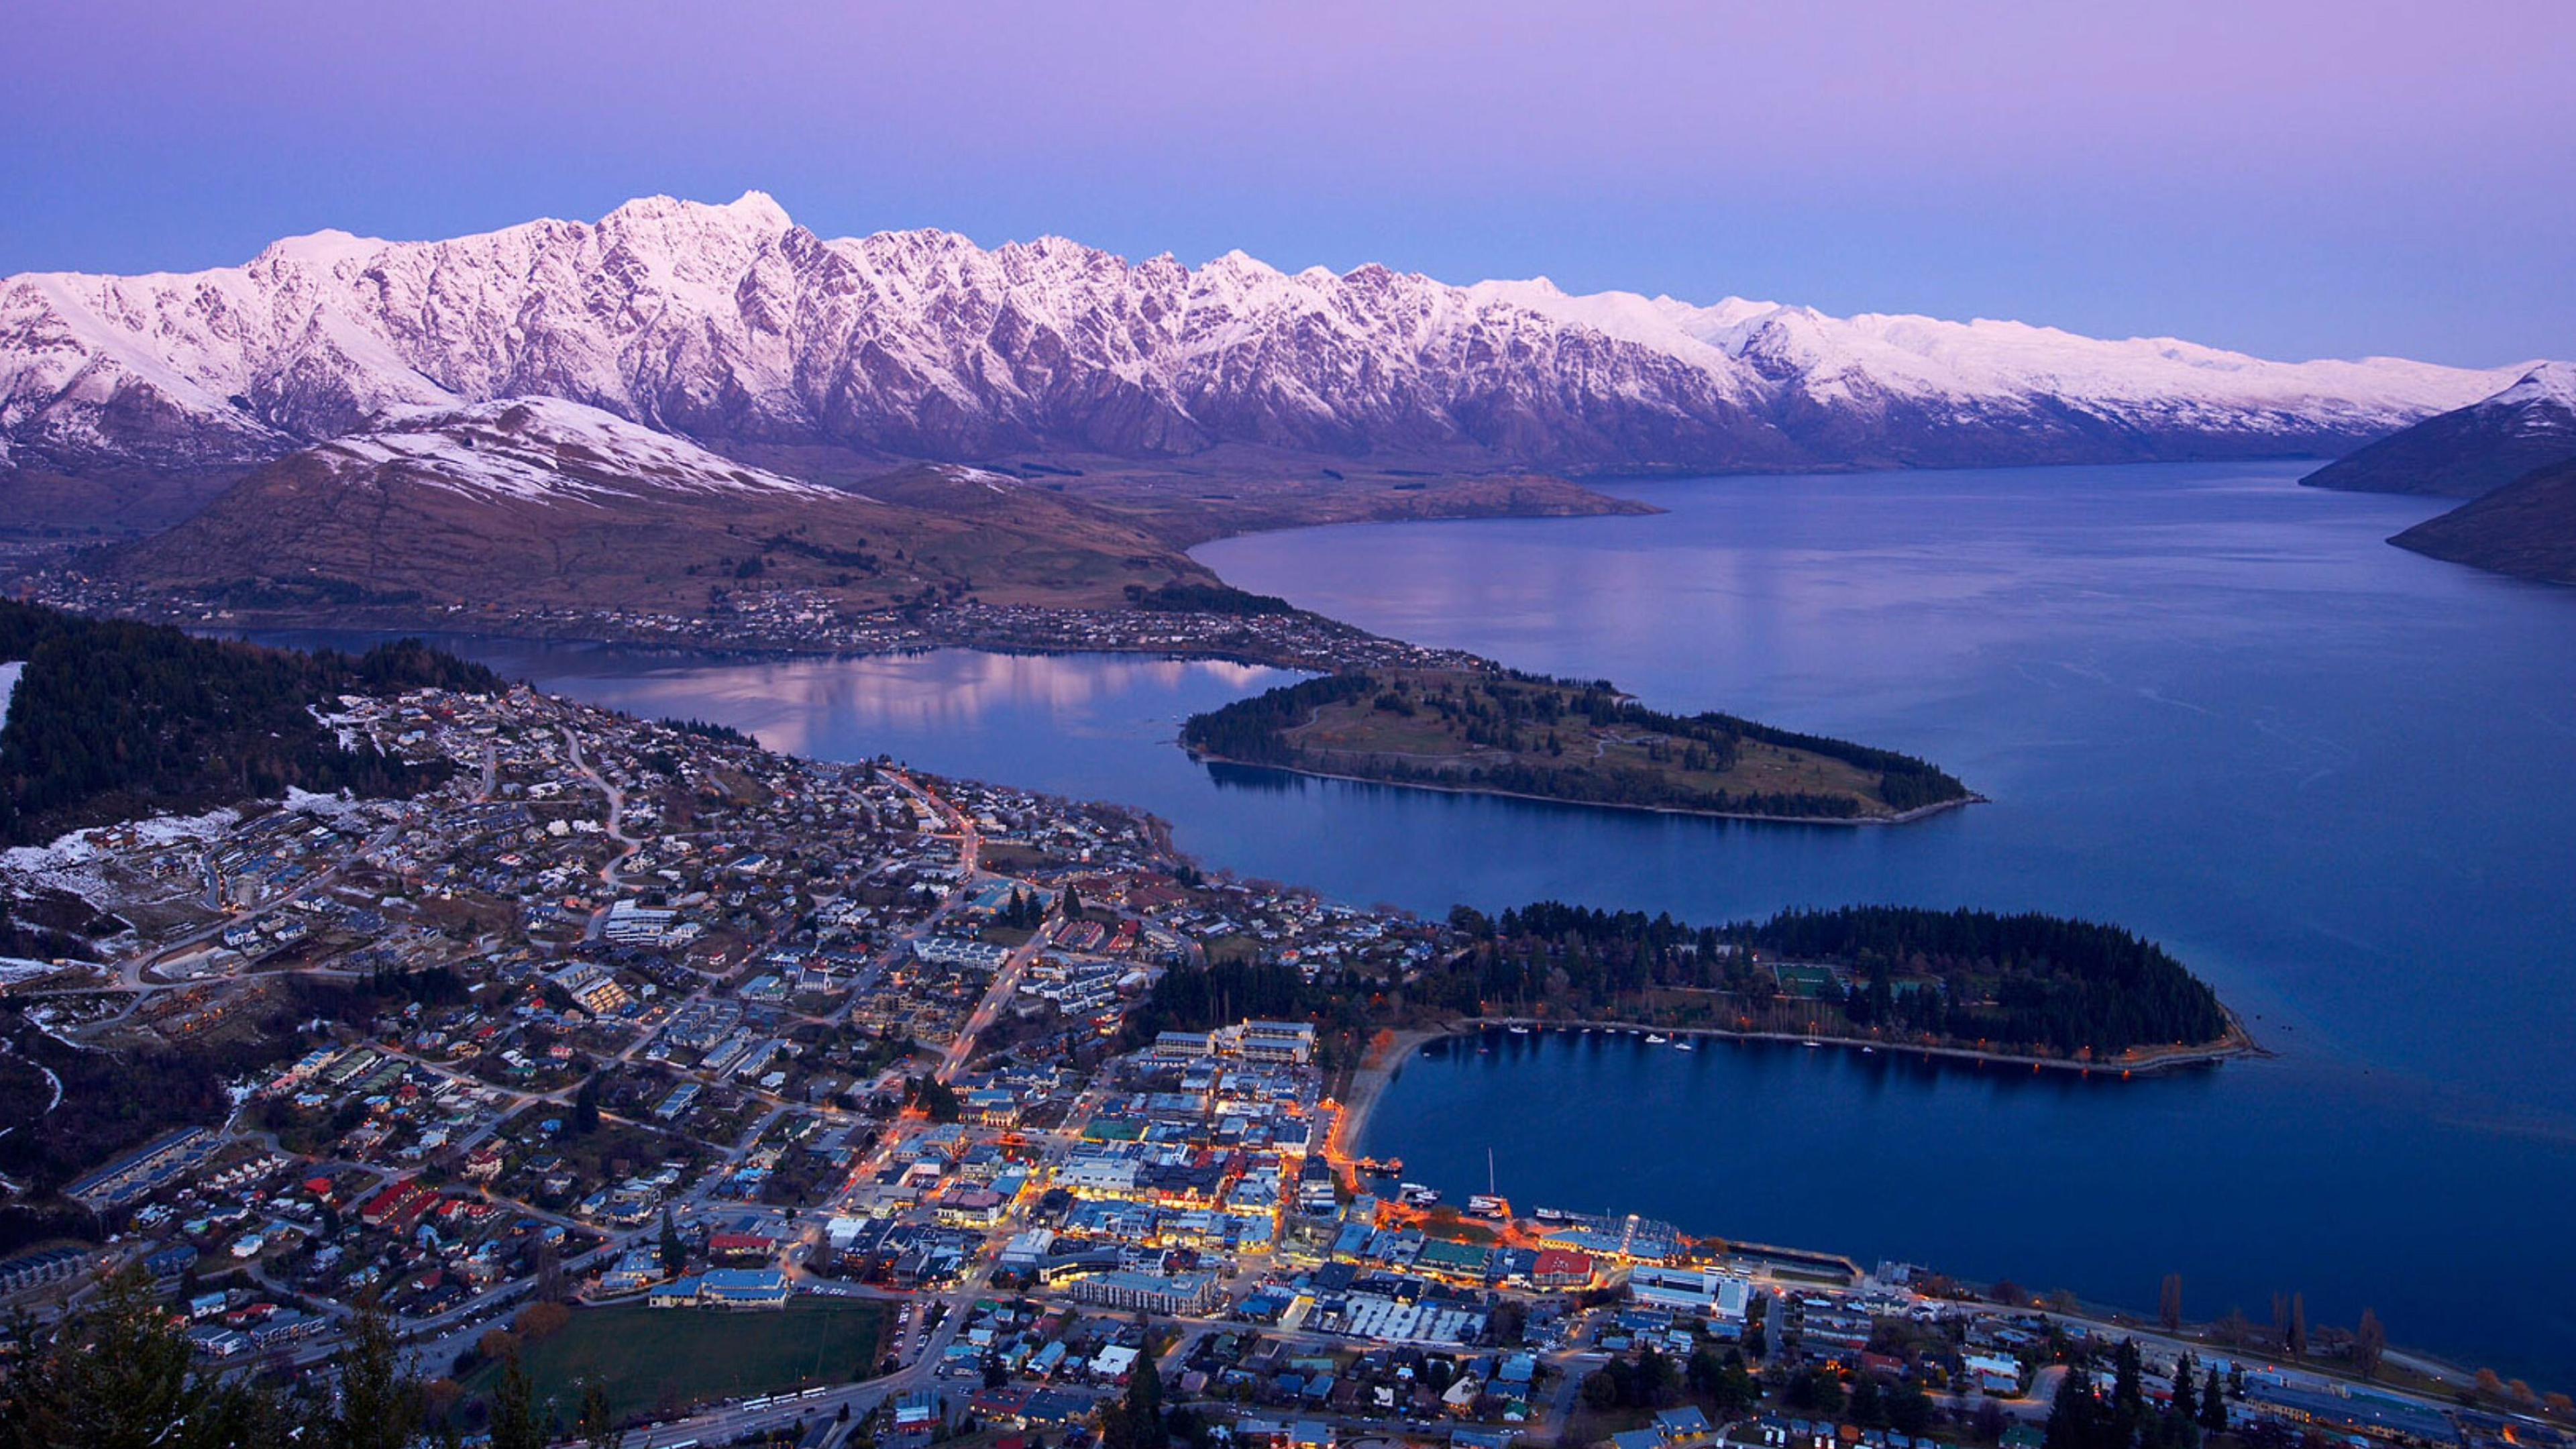 New Zealand: Queenstown, Scenery, The country gained full statutory independence in 1947. 3840x2160 4K Background.